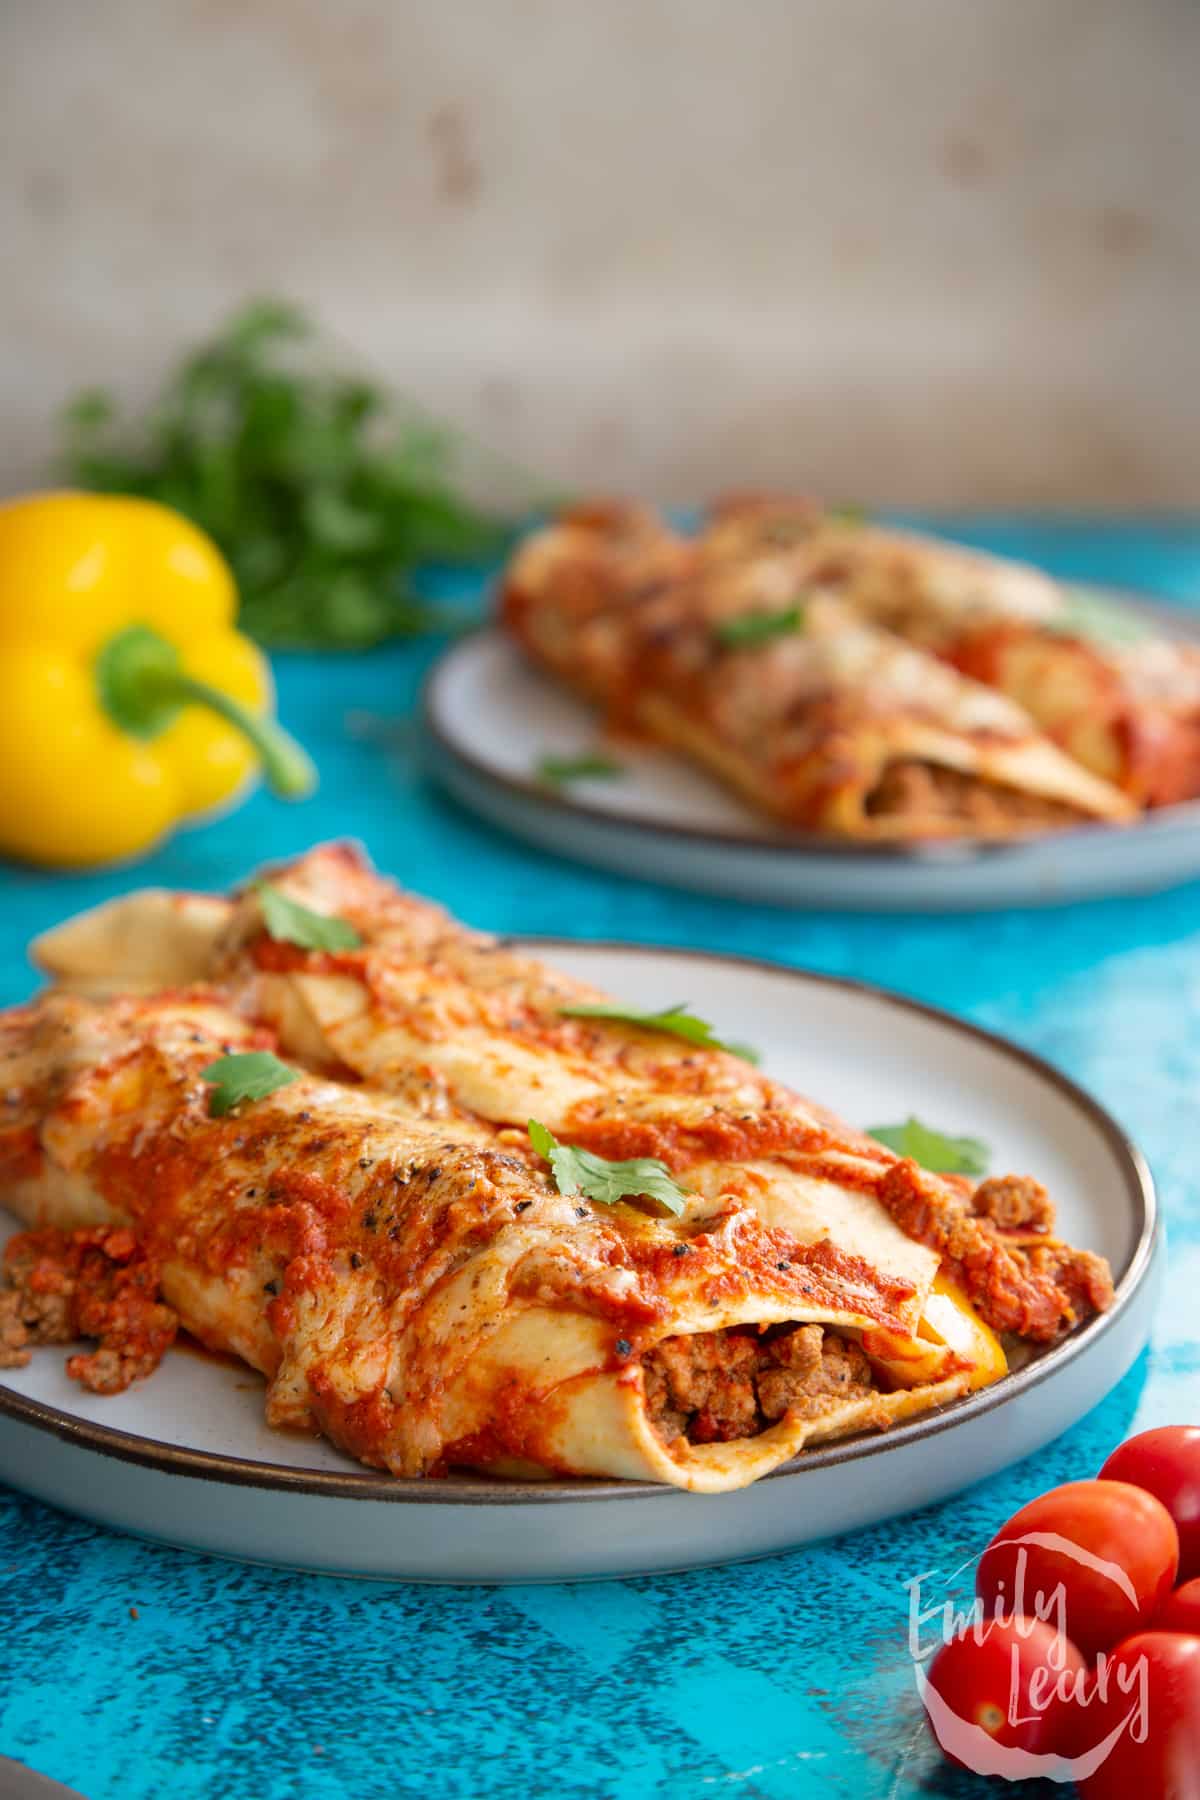 Quorn mince enchiladas served on a grey plate.